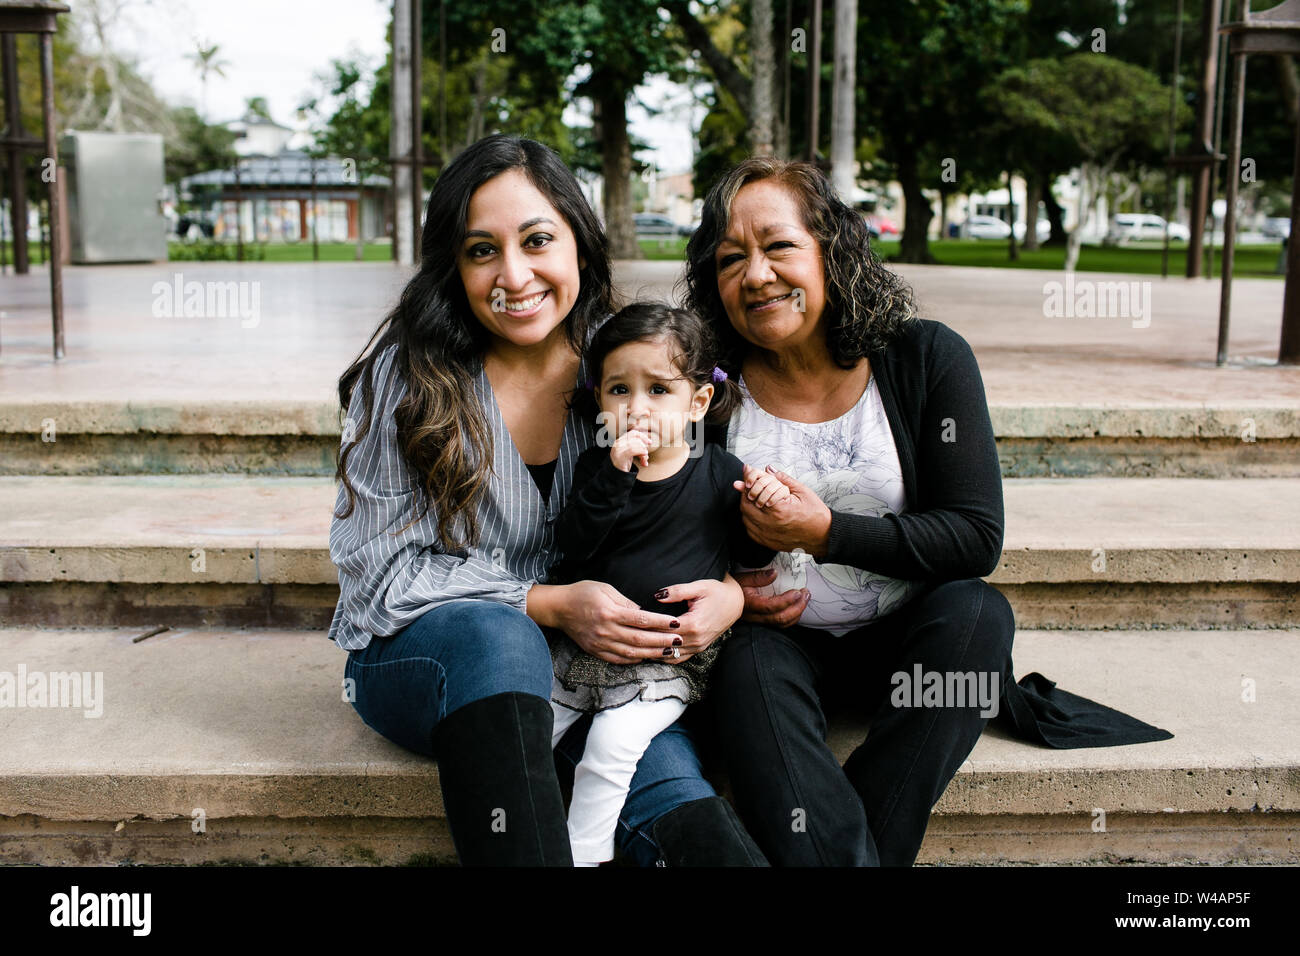 Three generations of women smiling for camera in park Stock Photo